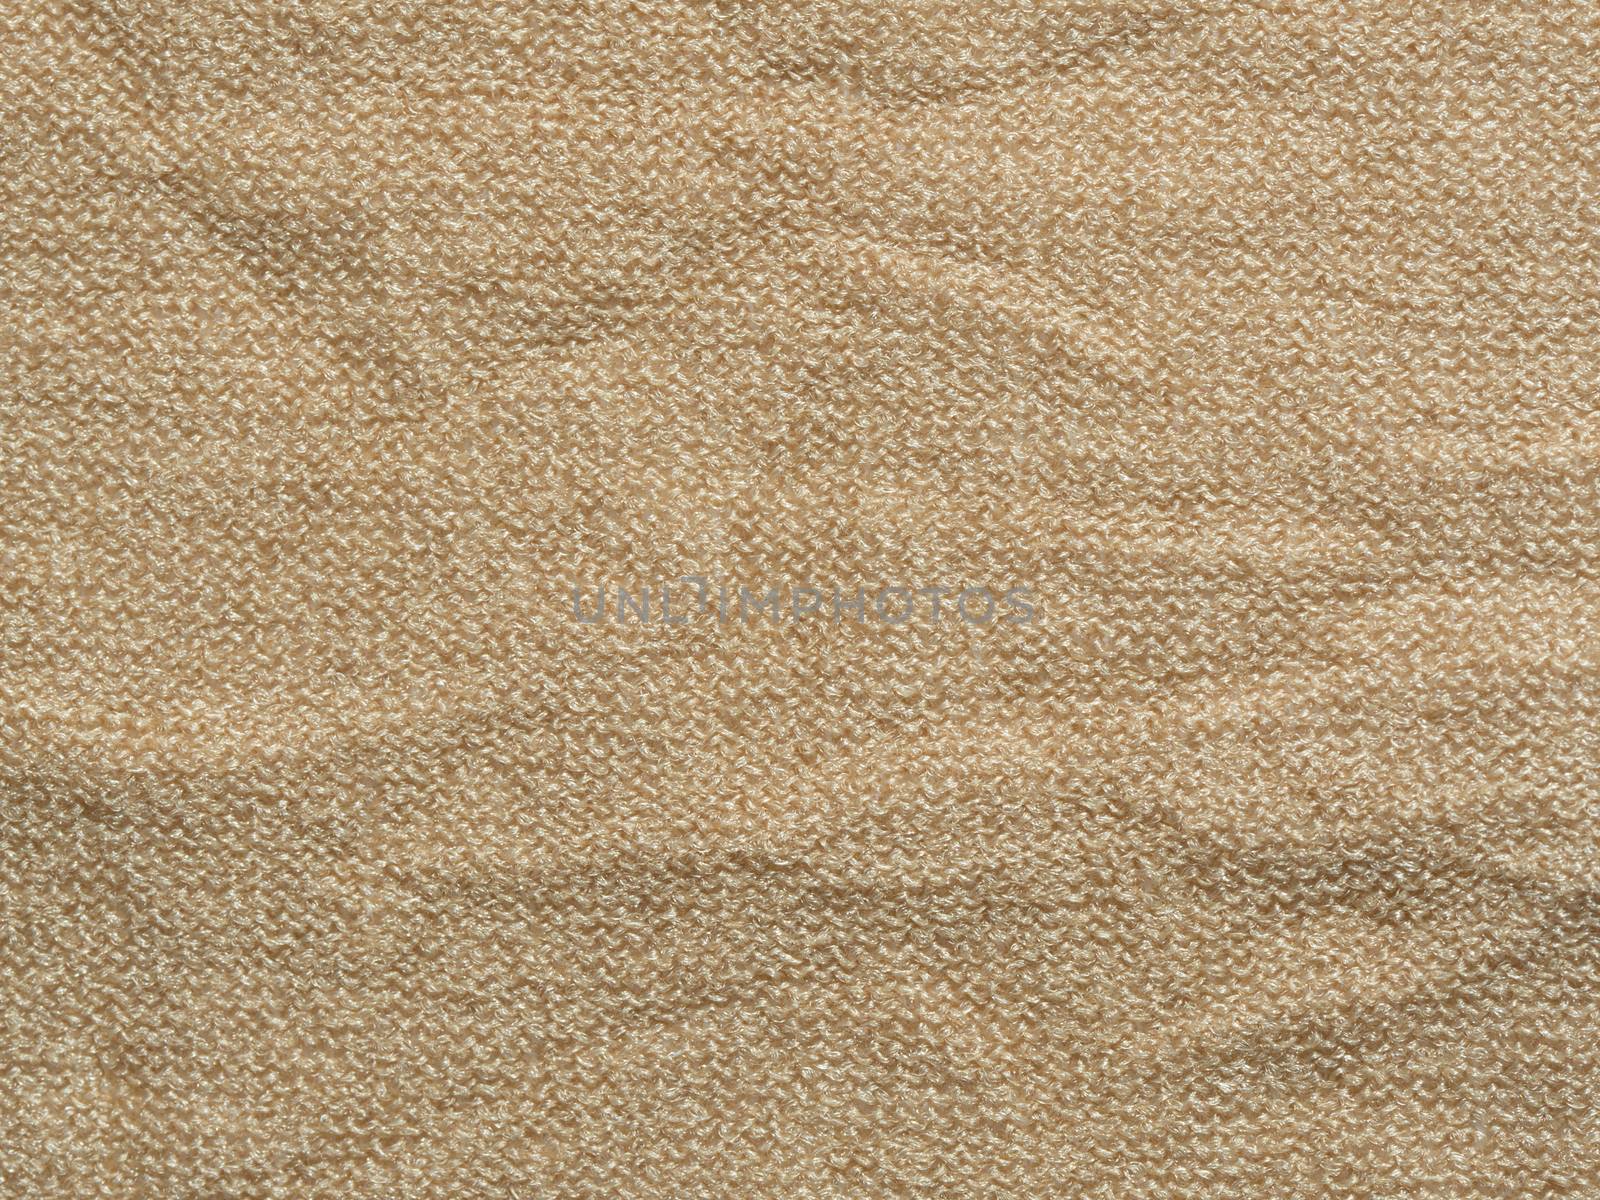 soft nude knitted stocking texture use as background by APTX4869